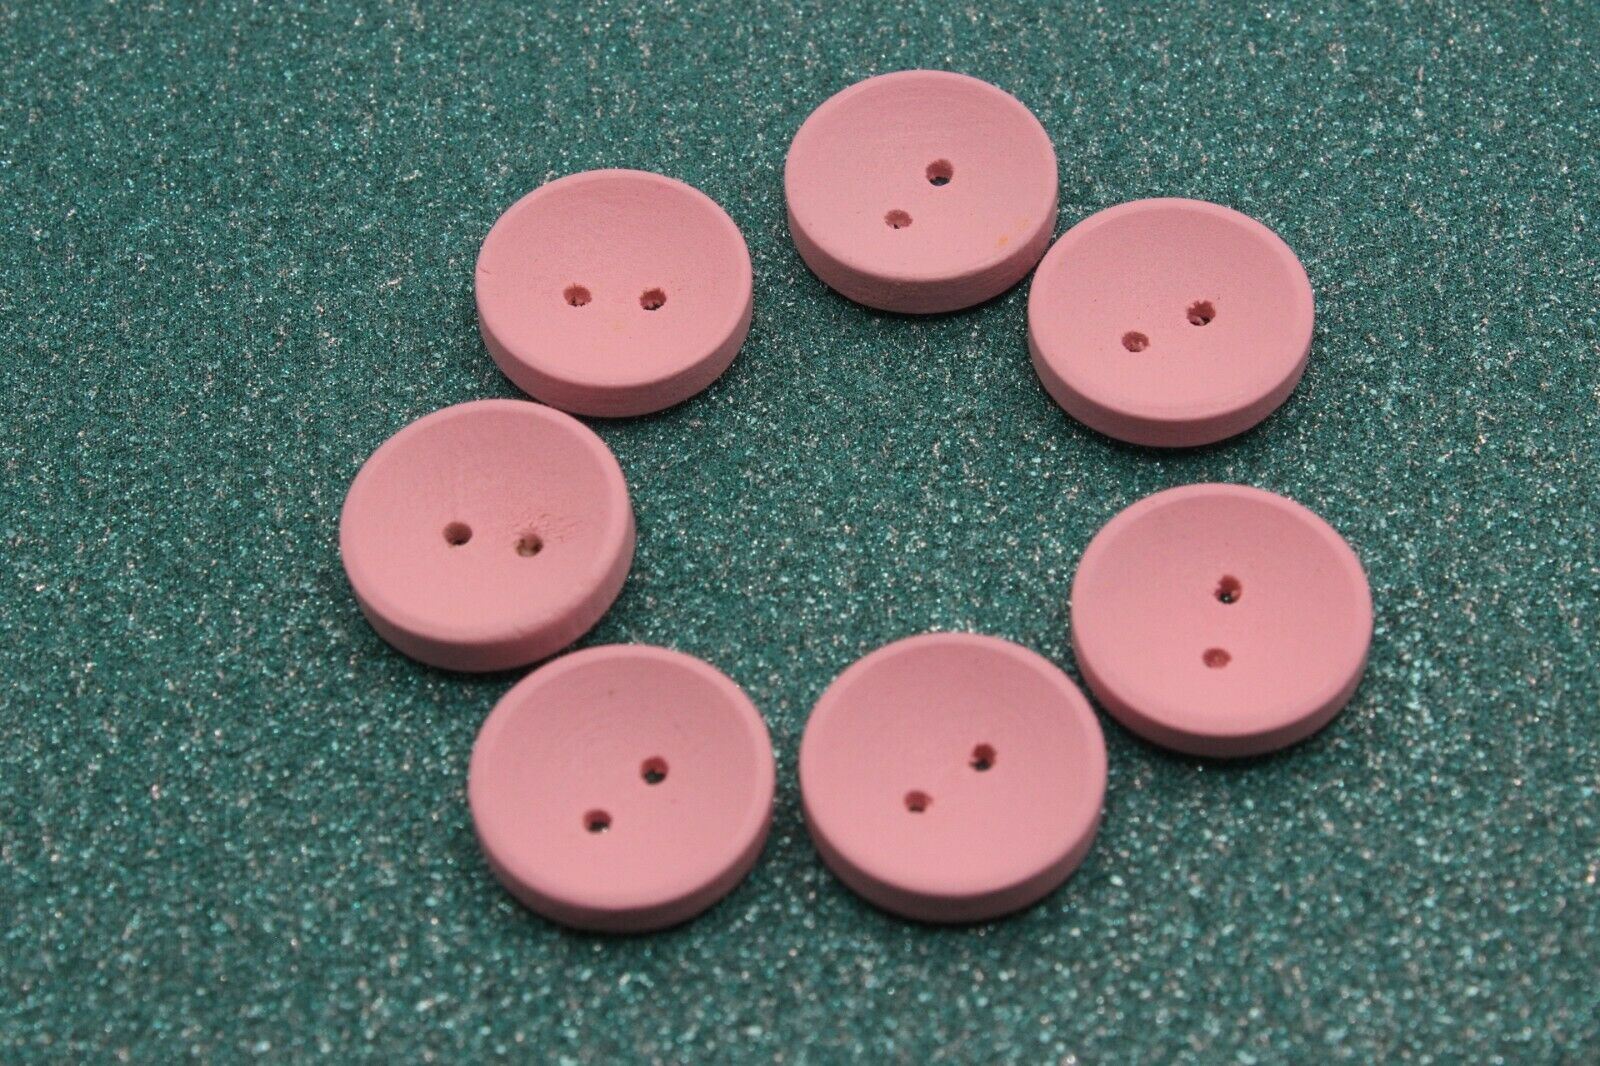 Renashed 50Pcs Mixed Color Design Wooden Buttons in Bulk for Crafts  Scrapbooking or Sewing and DIY Craft (30mm)